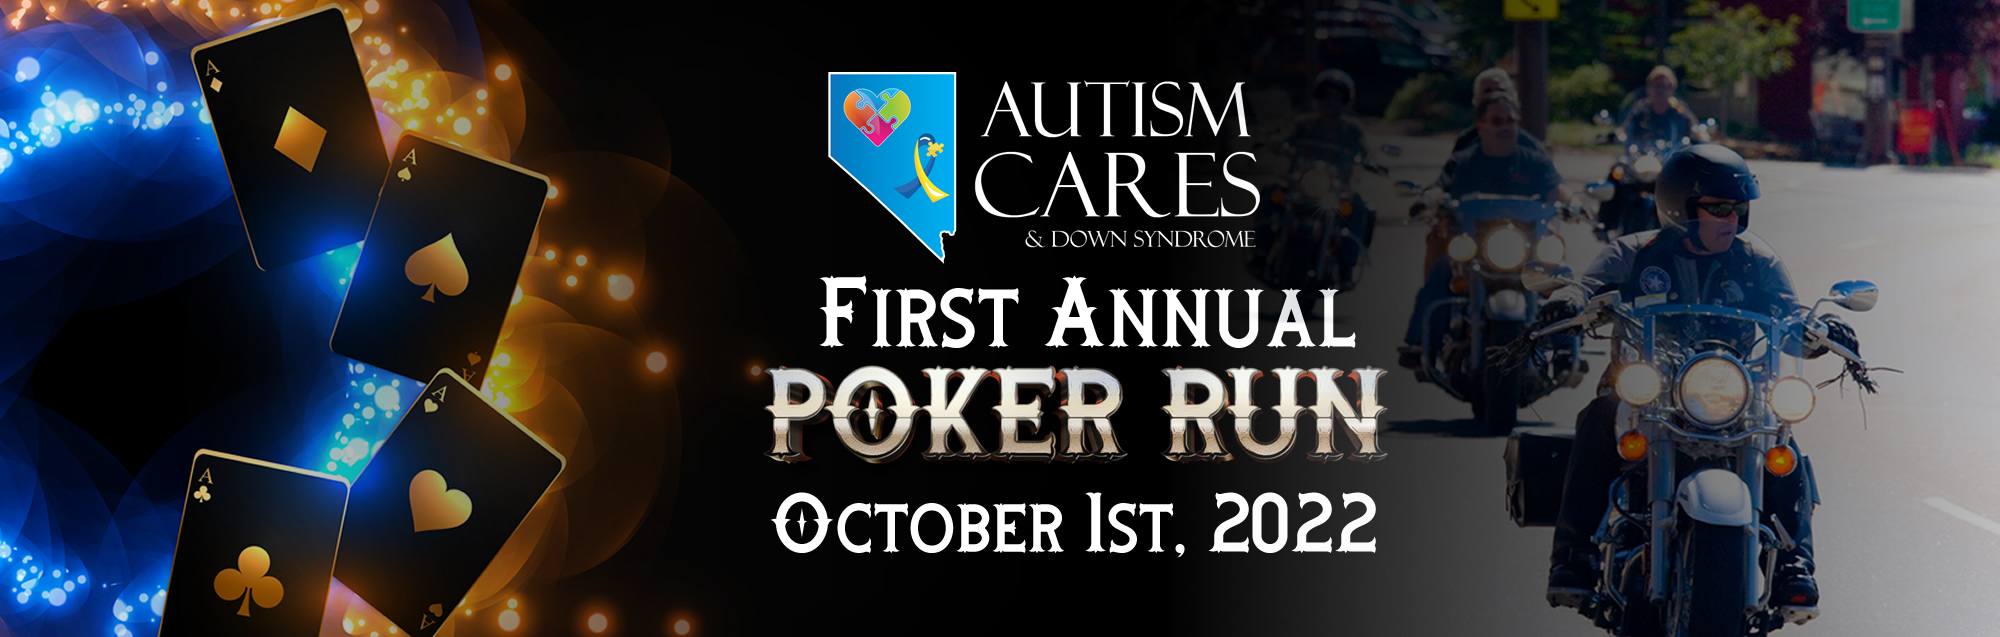 Autisms Cares and Down Syndrome Poker Run Fundraiser Event